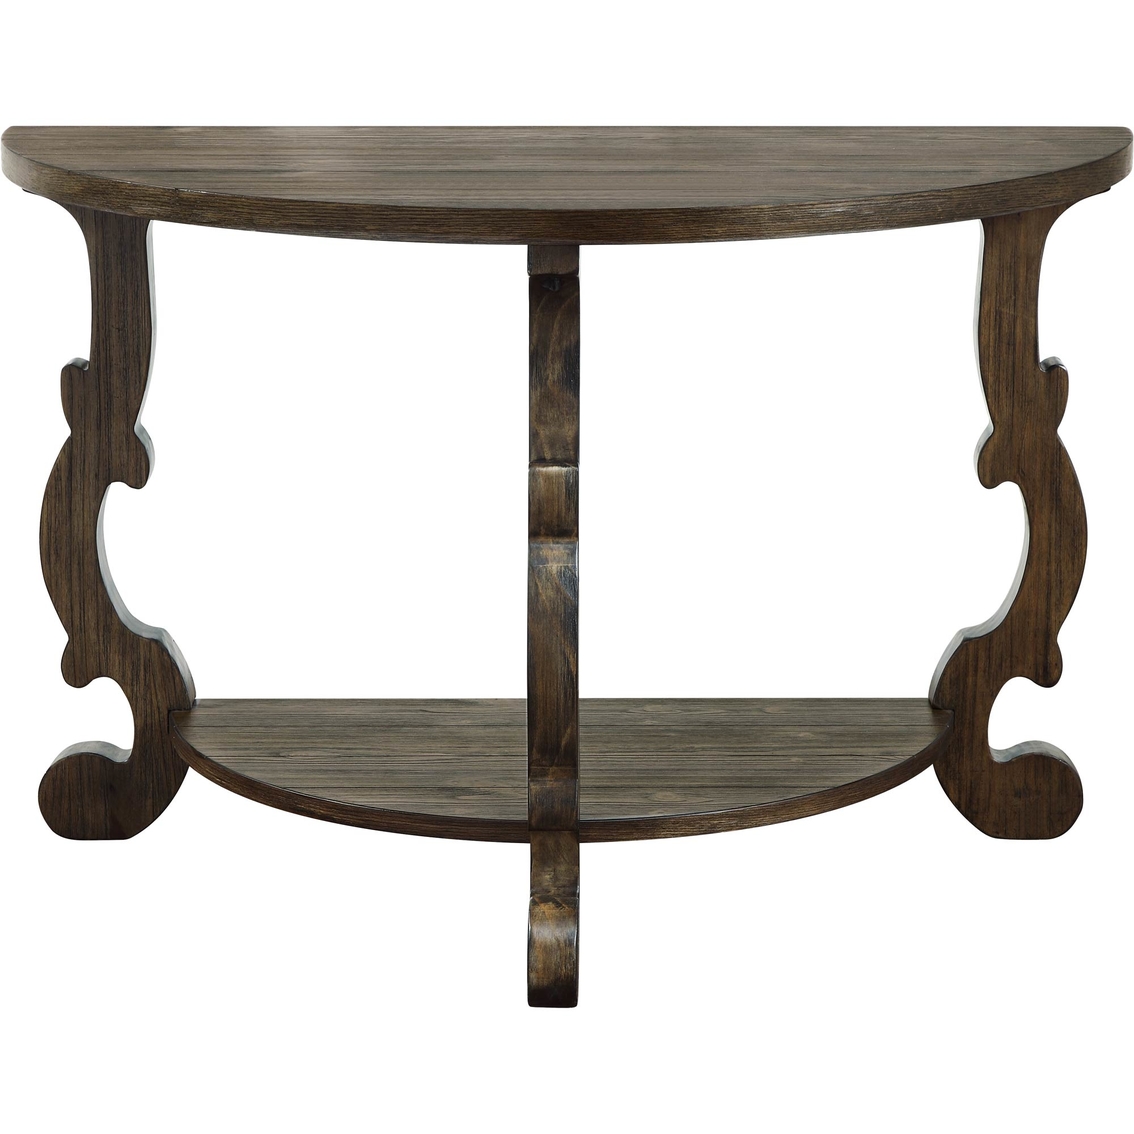 Coast to Coast Accents Orchard Park Demilune Console Table - Image 2 of 3